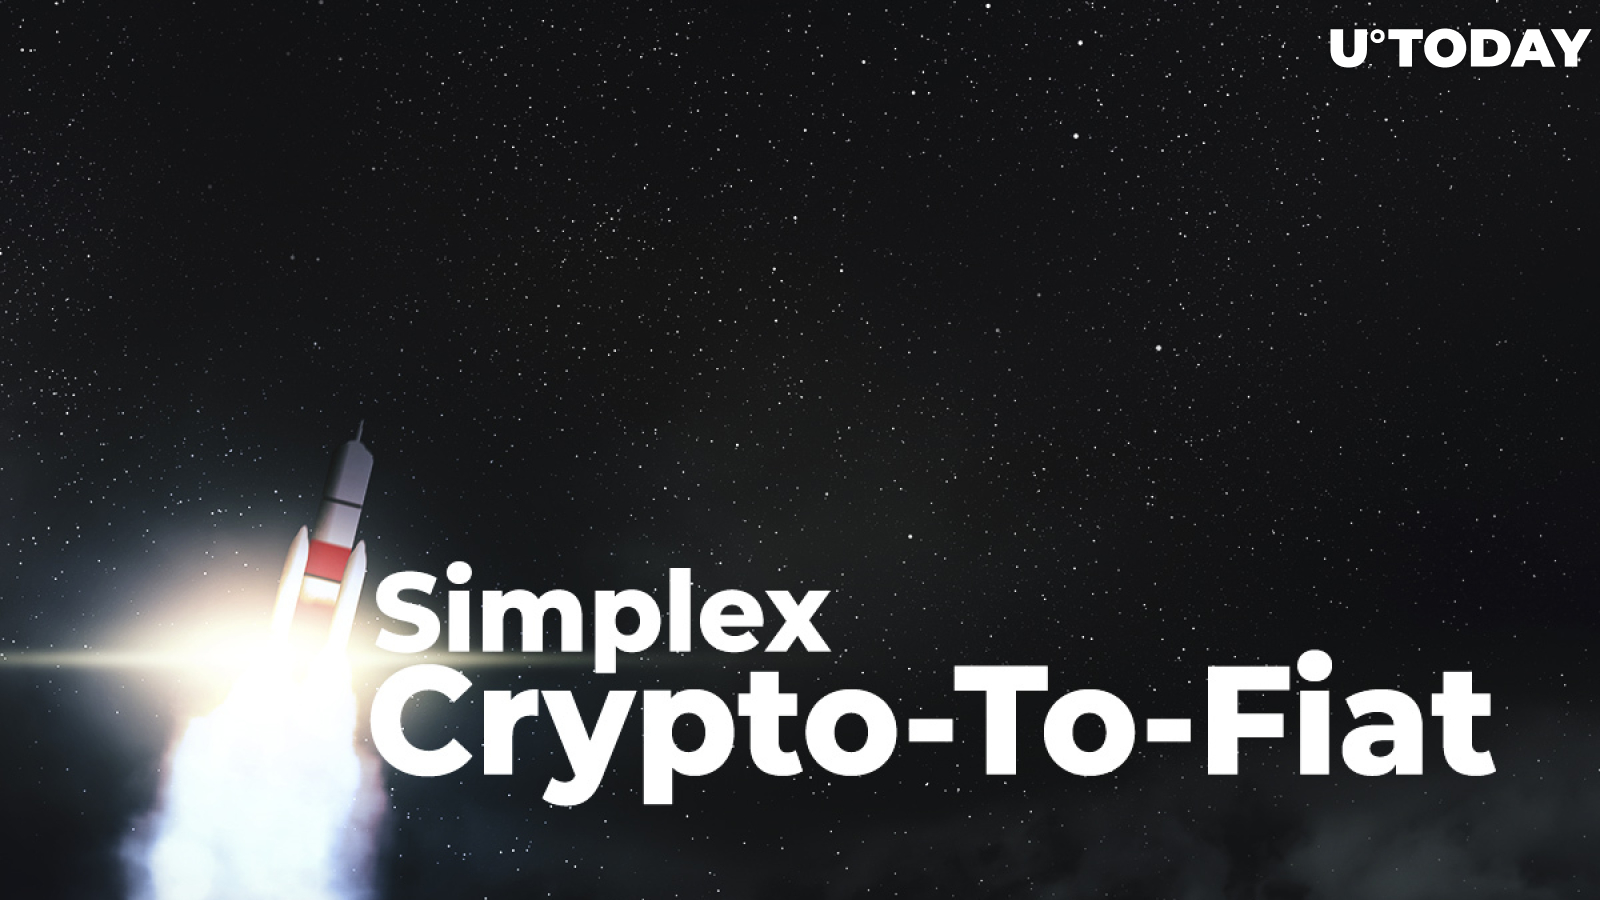 Crypto-to-Fiat Banking Solution Launched by Simplex